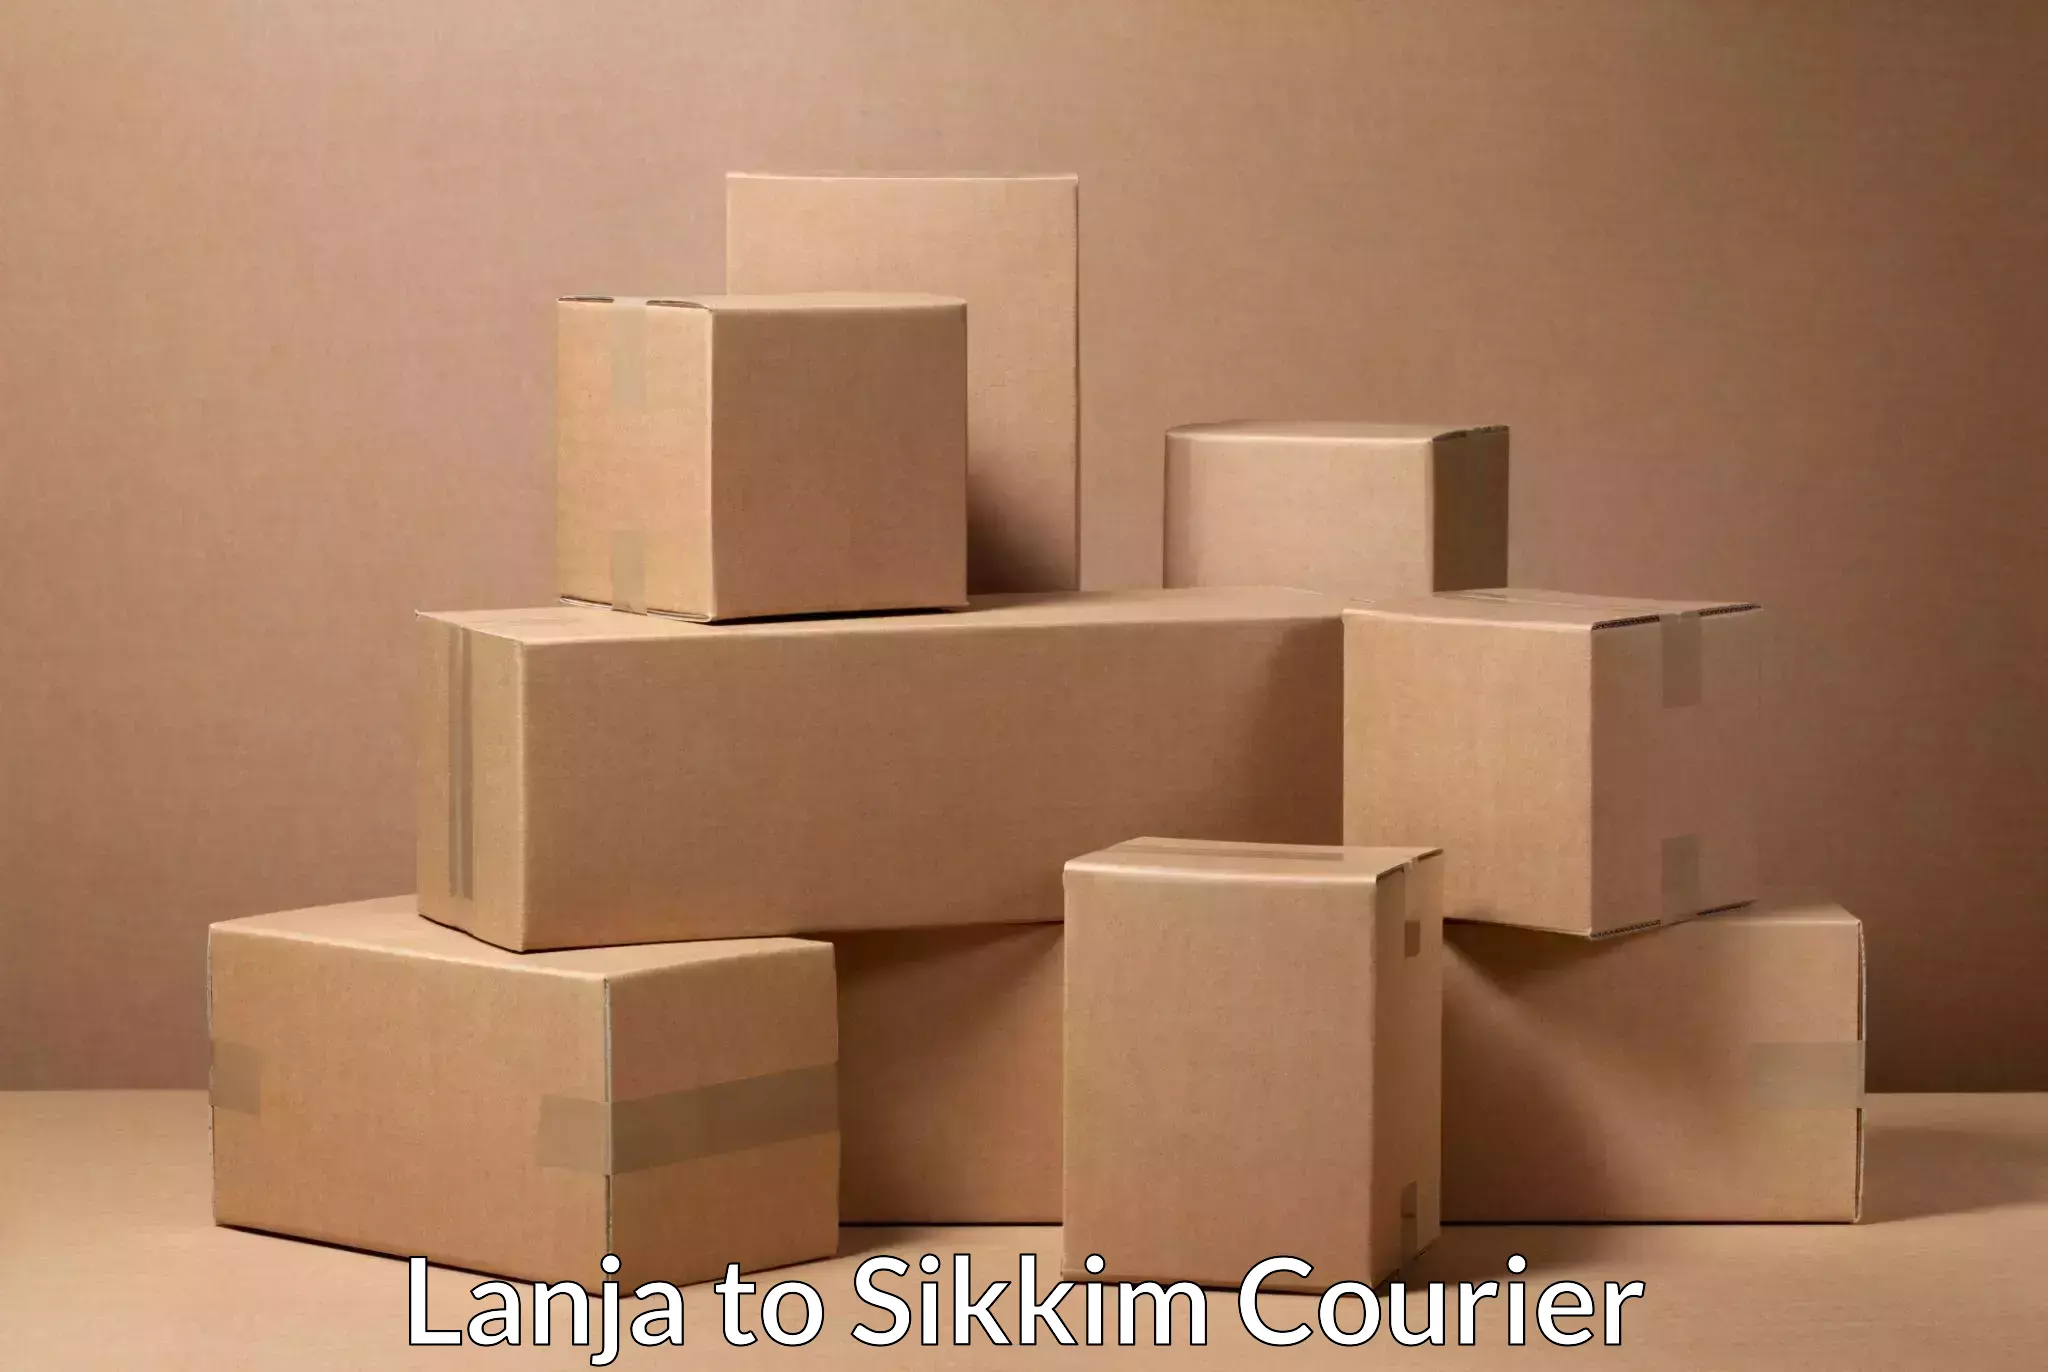 Global shipping networks Lanja to East Sikkim